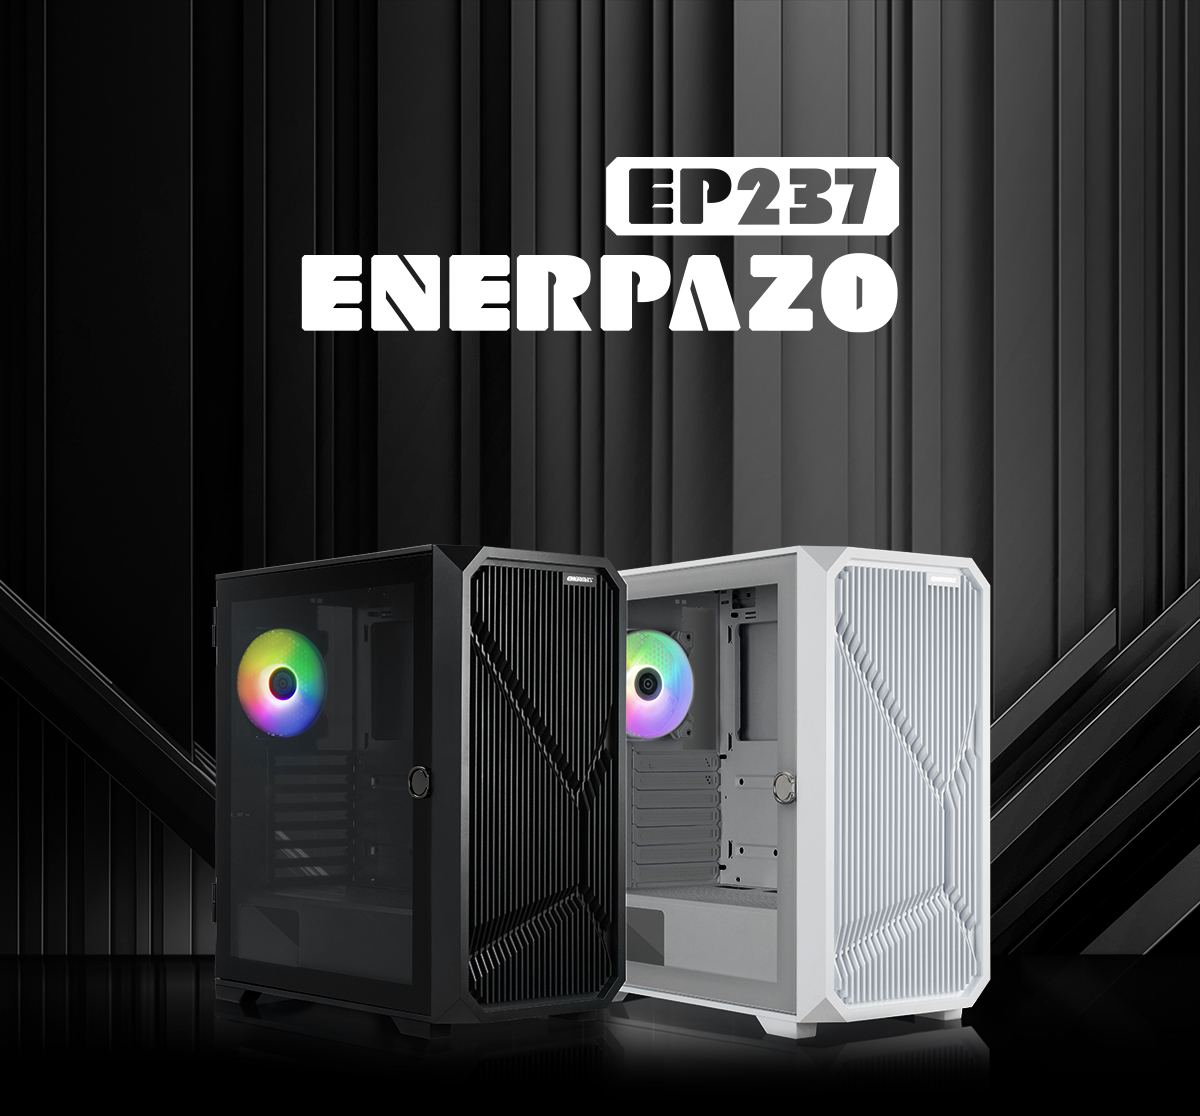 EP237-pc-case system